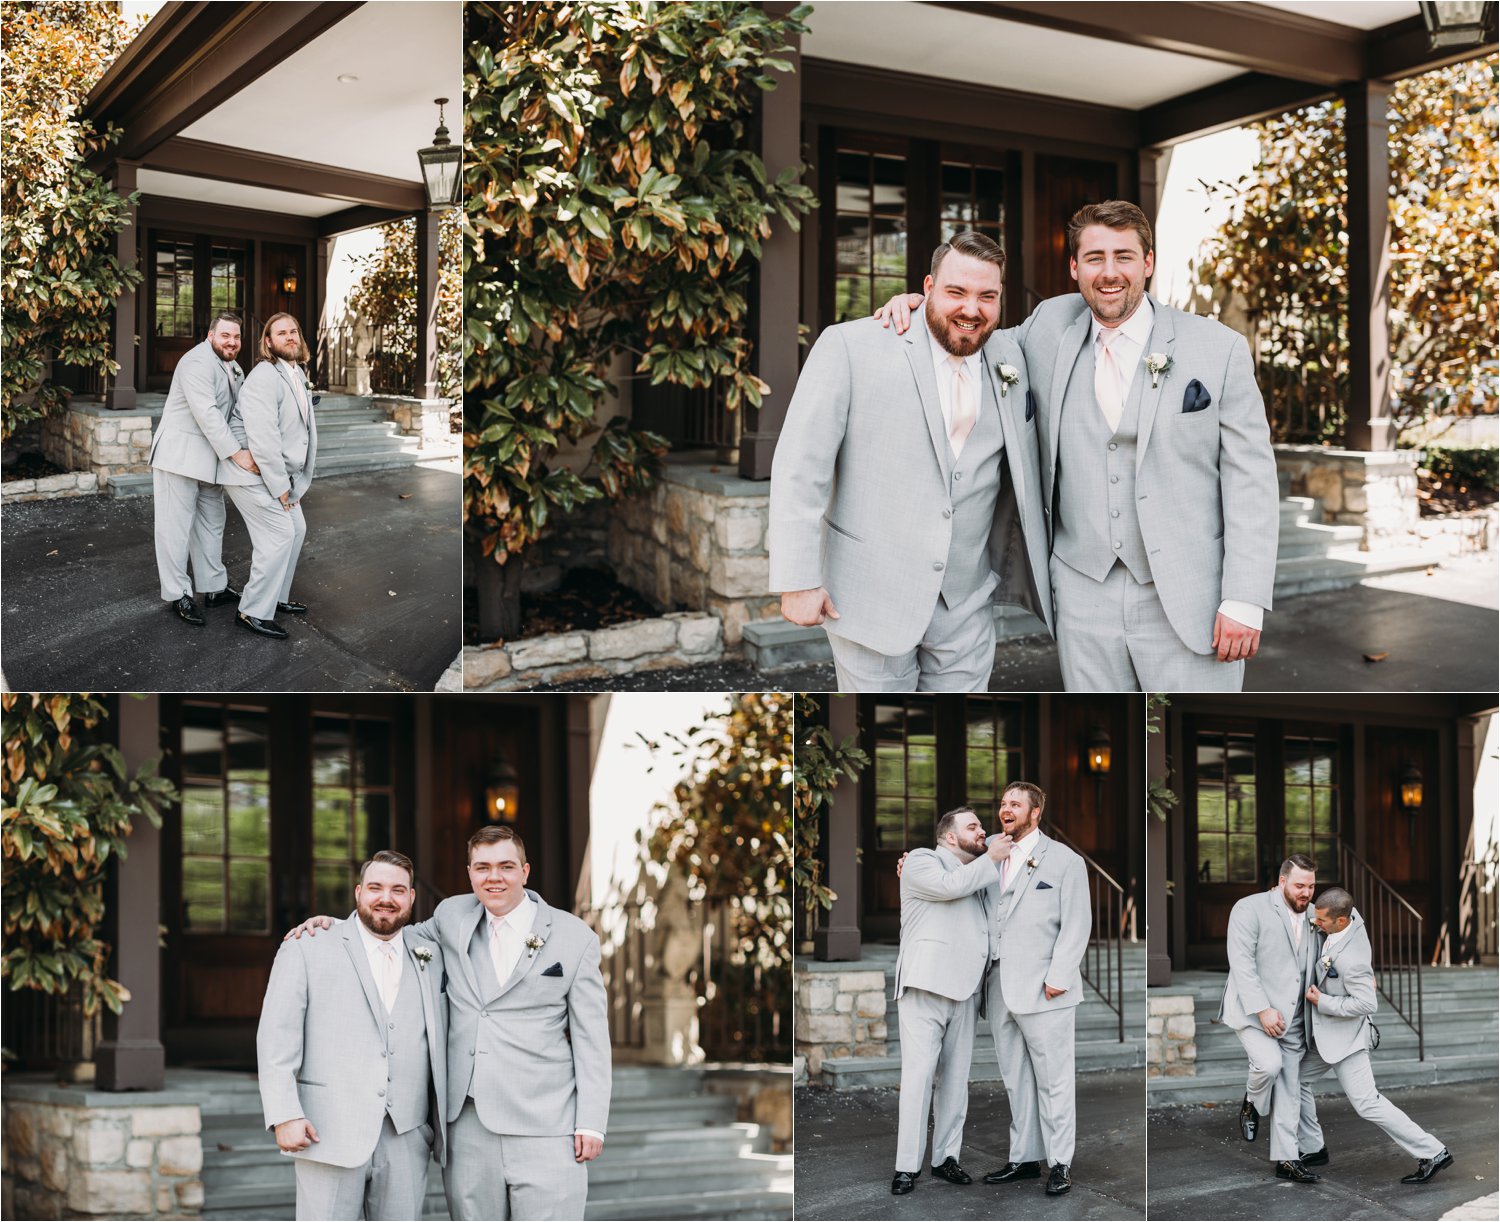  images by feliciathephotographer.com | destination wedding photographer | spring time | carriage club | exclusive | groomsmen | silly | funny portraits | grey suits | jos a bank | pink ties | best friends | laughter | 